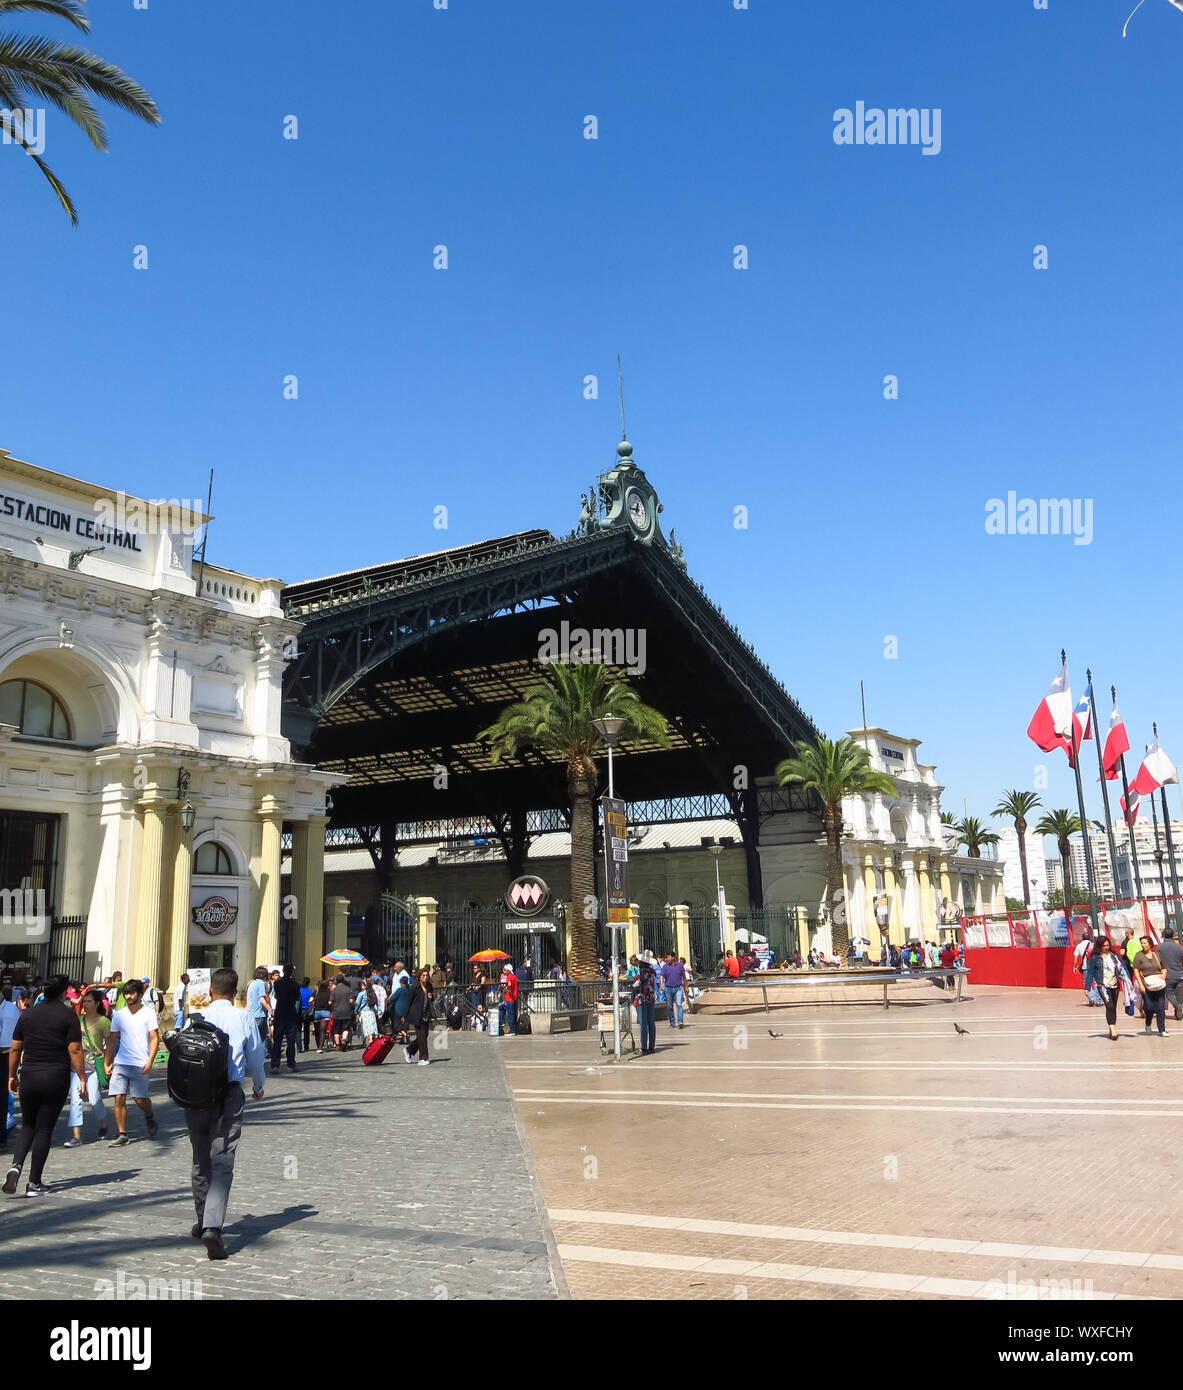 Santiago, Chile - January, 24: Exterior view of the central station of Santiago de Chile, located on Alameda Avenue. This station is the main one of t Stock Photo